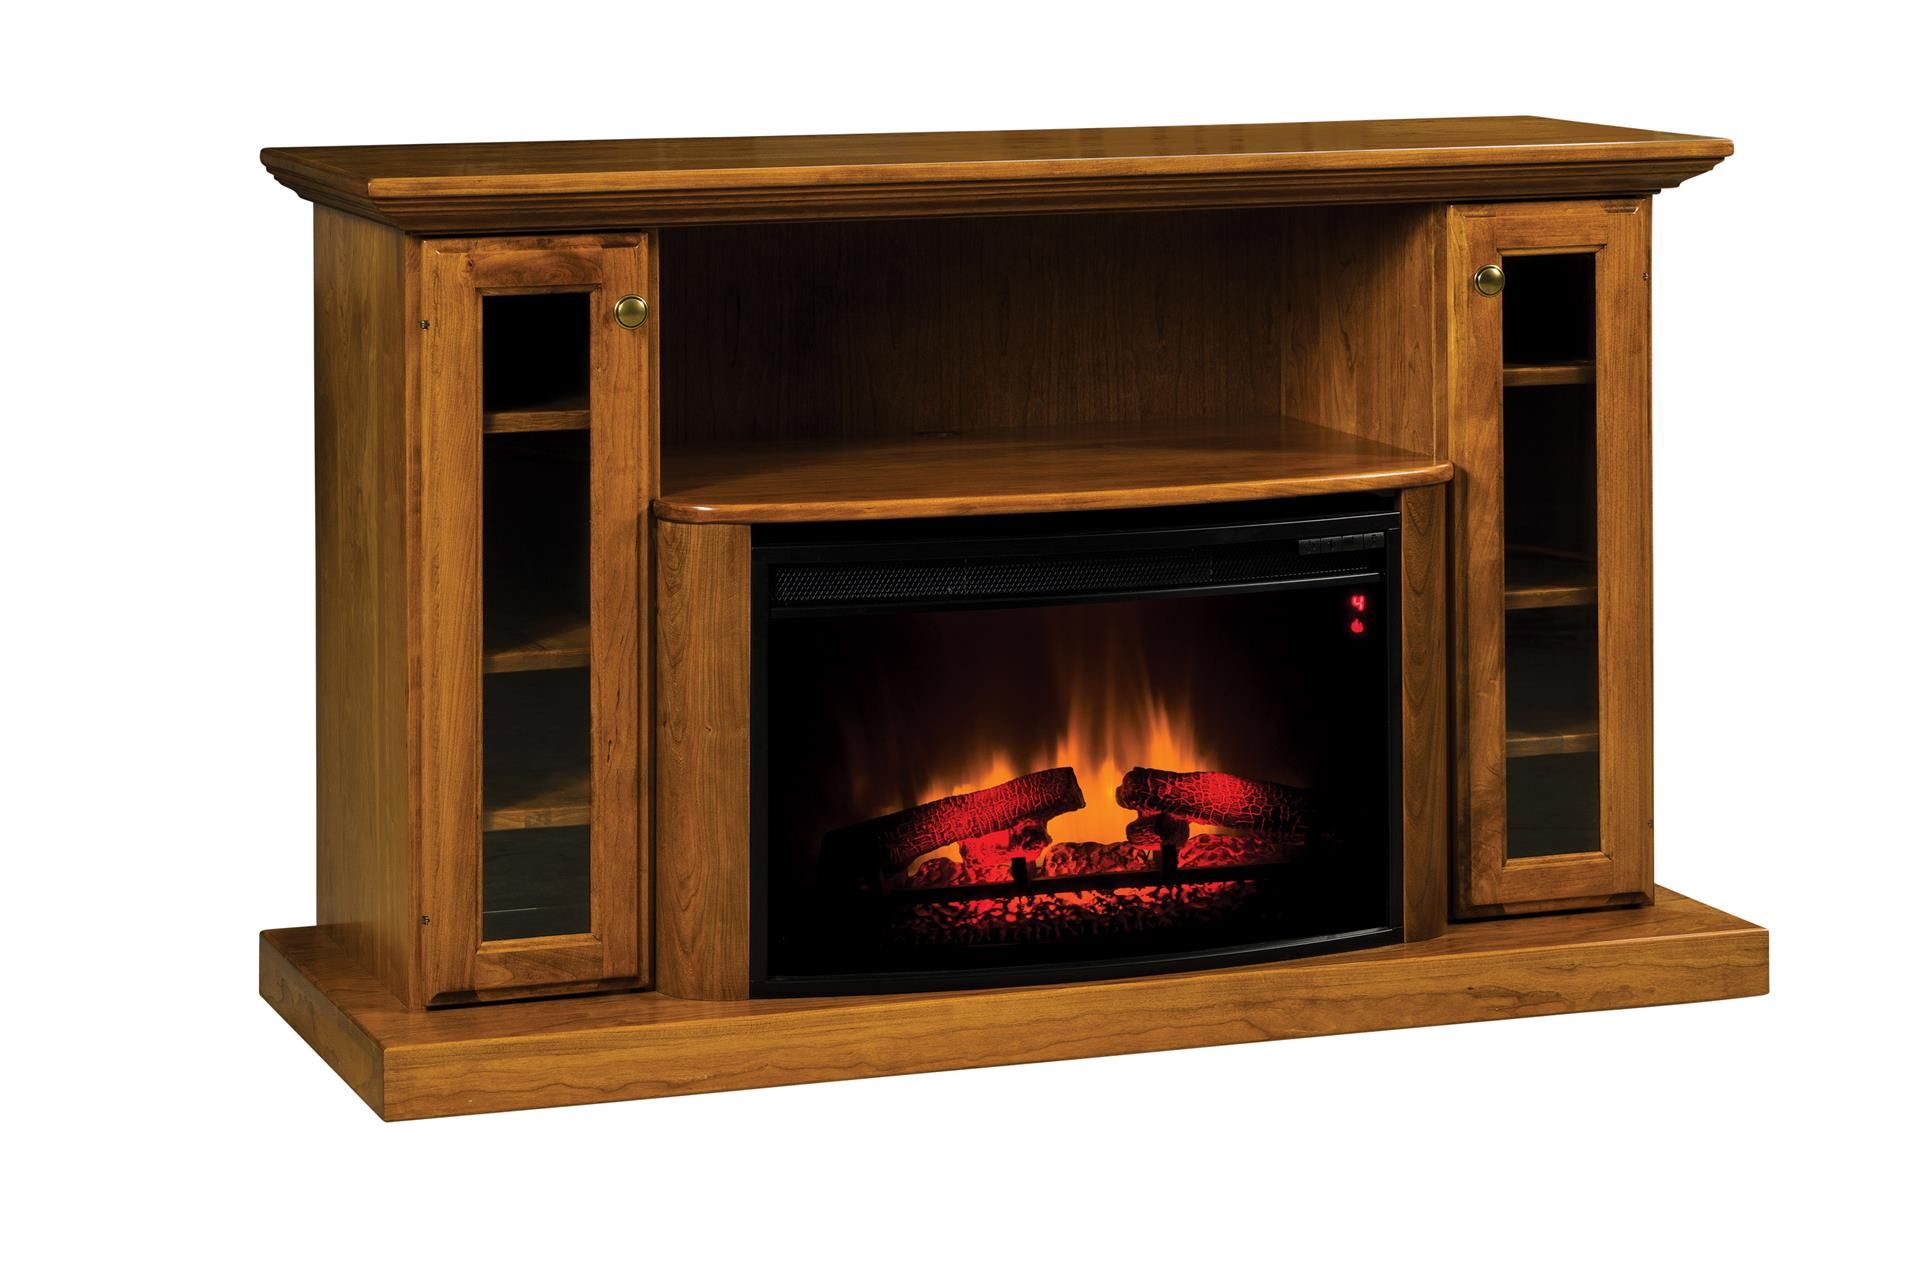 Magic Flame Electric Fireplace Luxury Modern Flames Clx Series Wall Mount Built In Electric